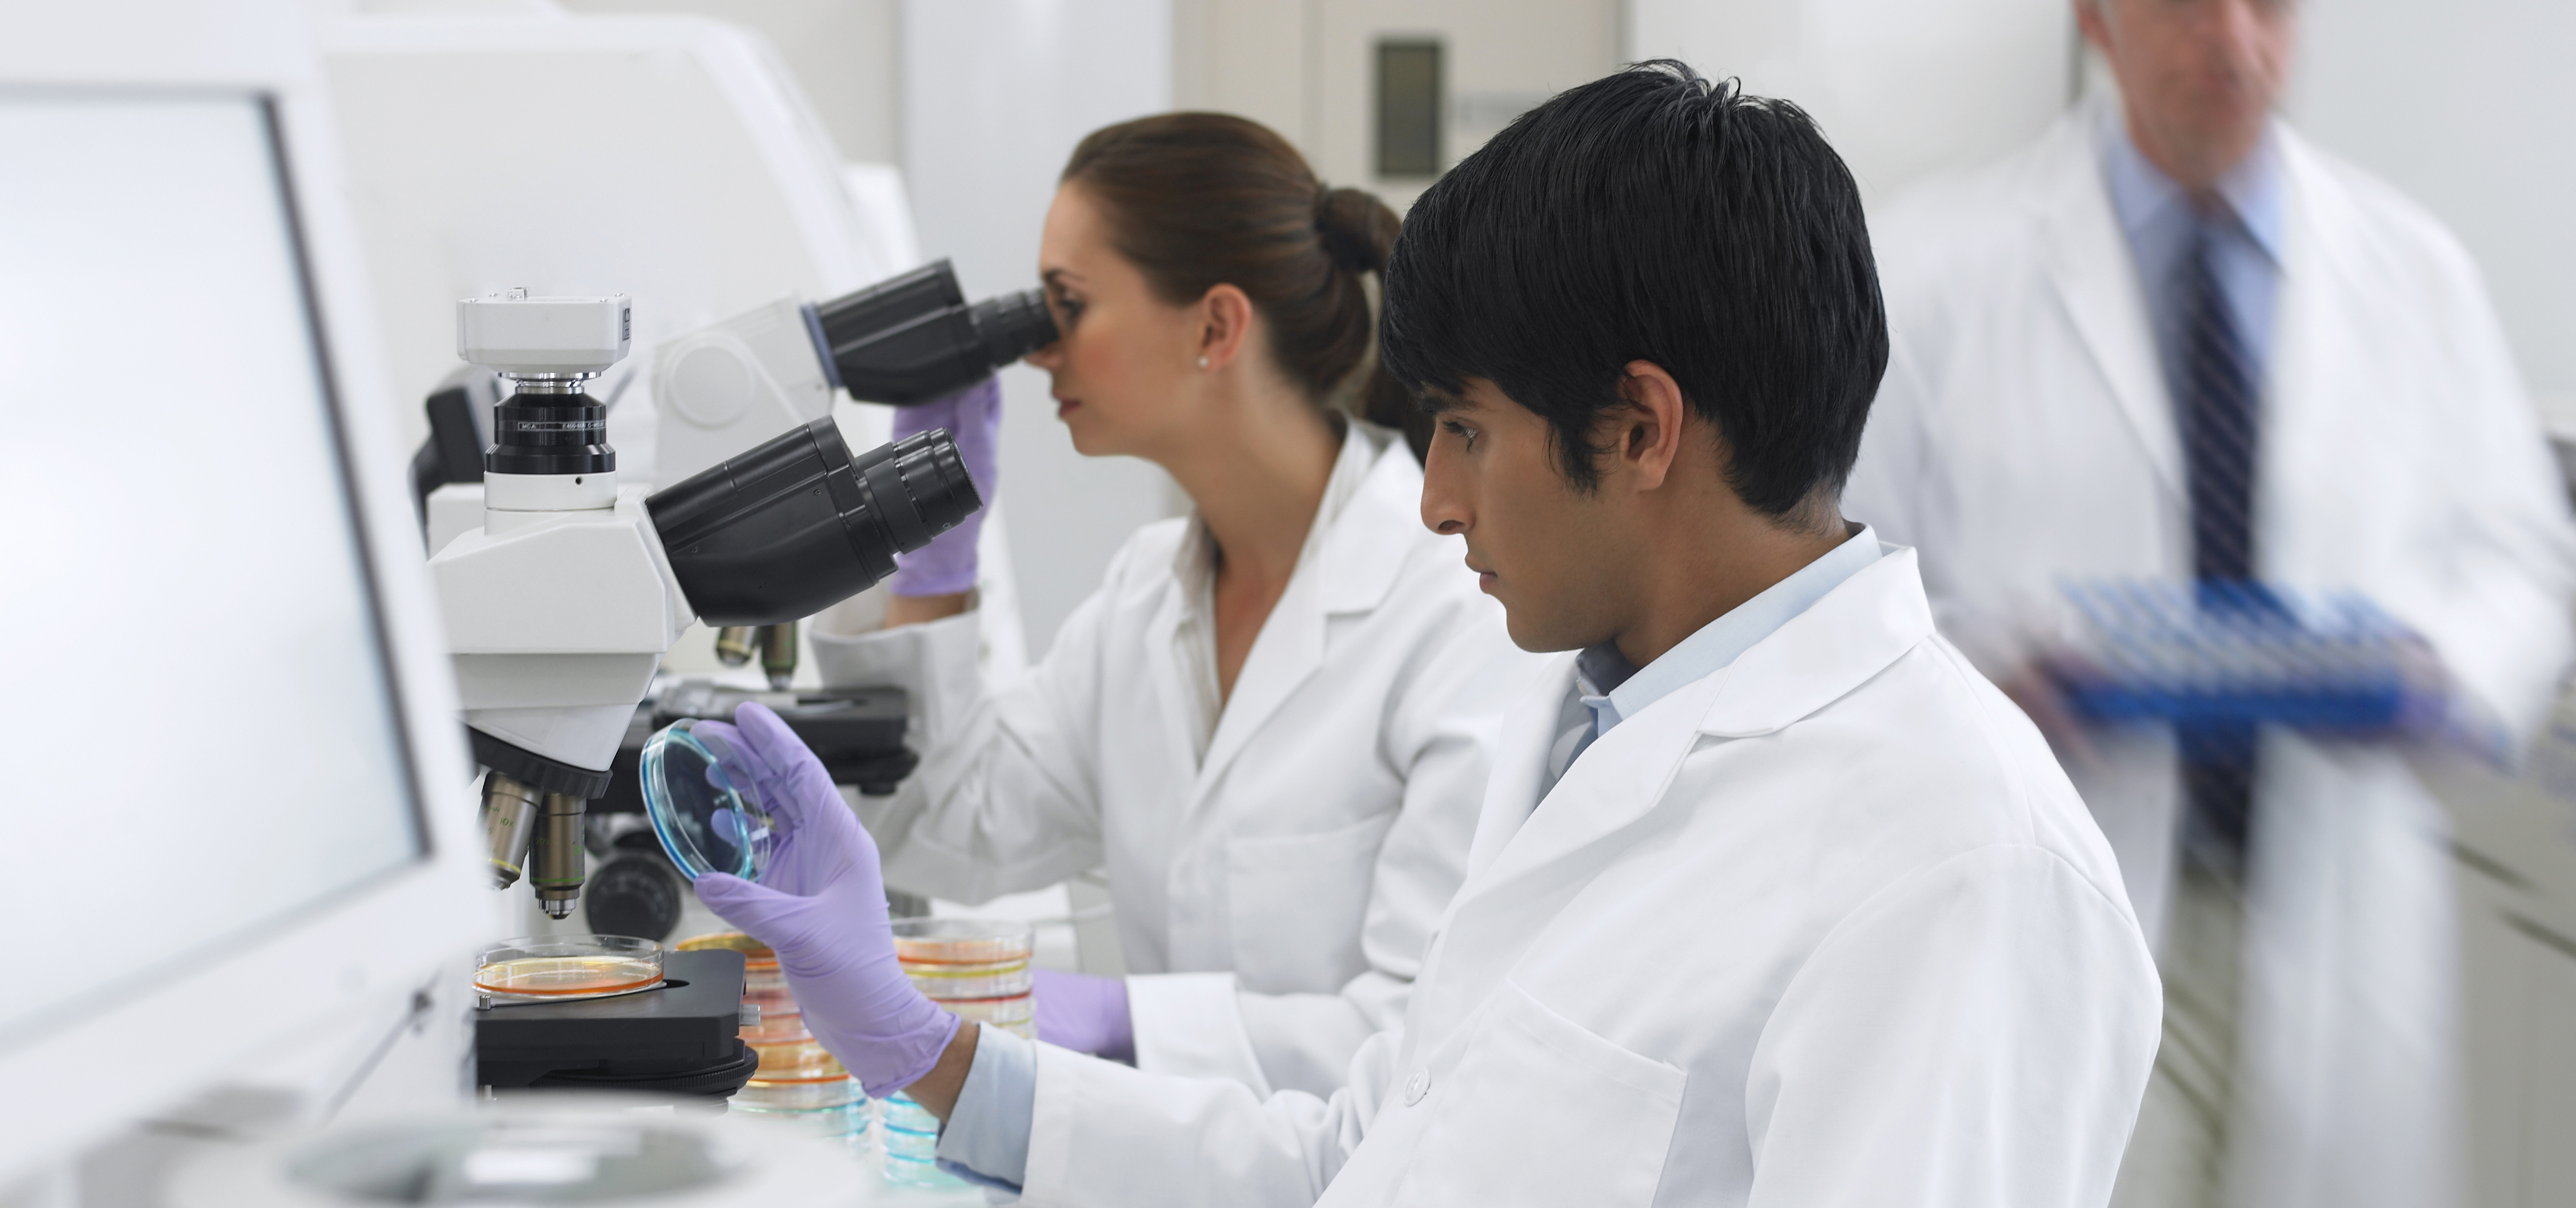 Researchers in a lab-image